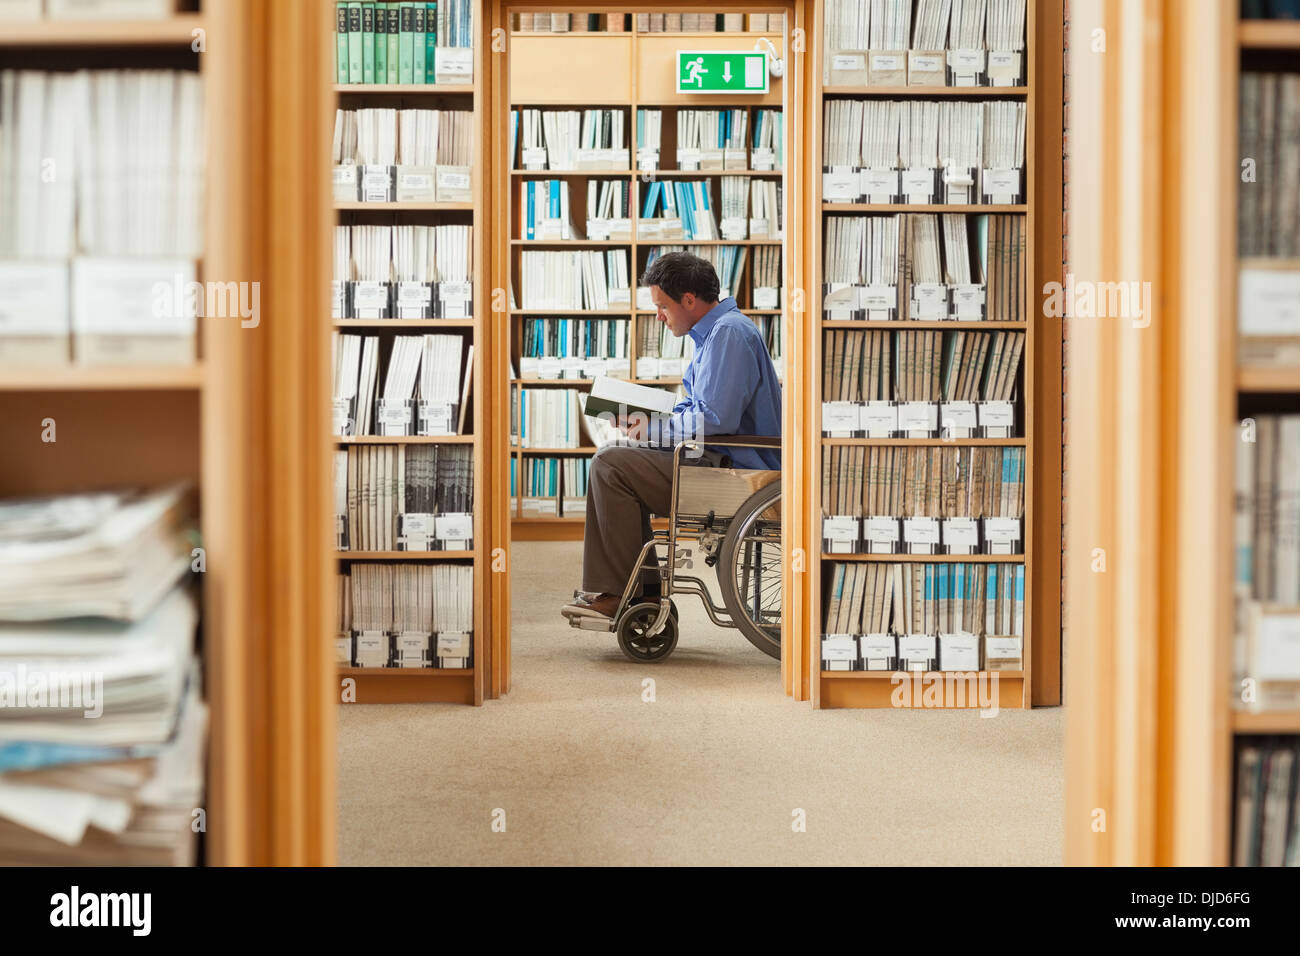 Man sitting in wheelchair reading a book Stock Photo